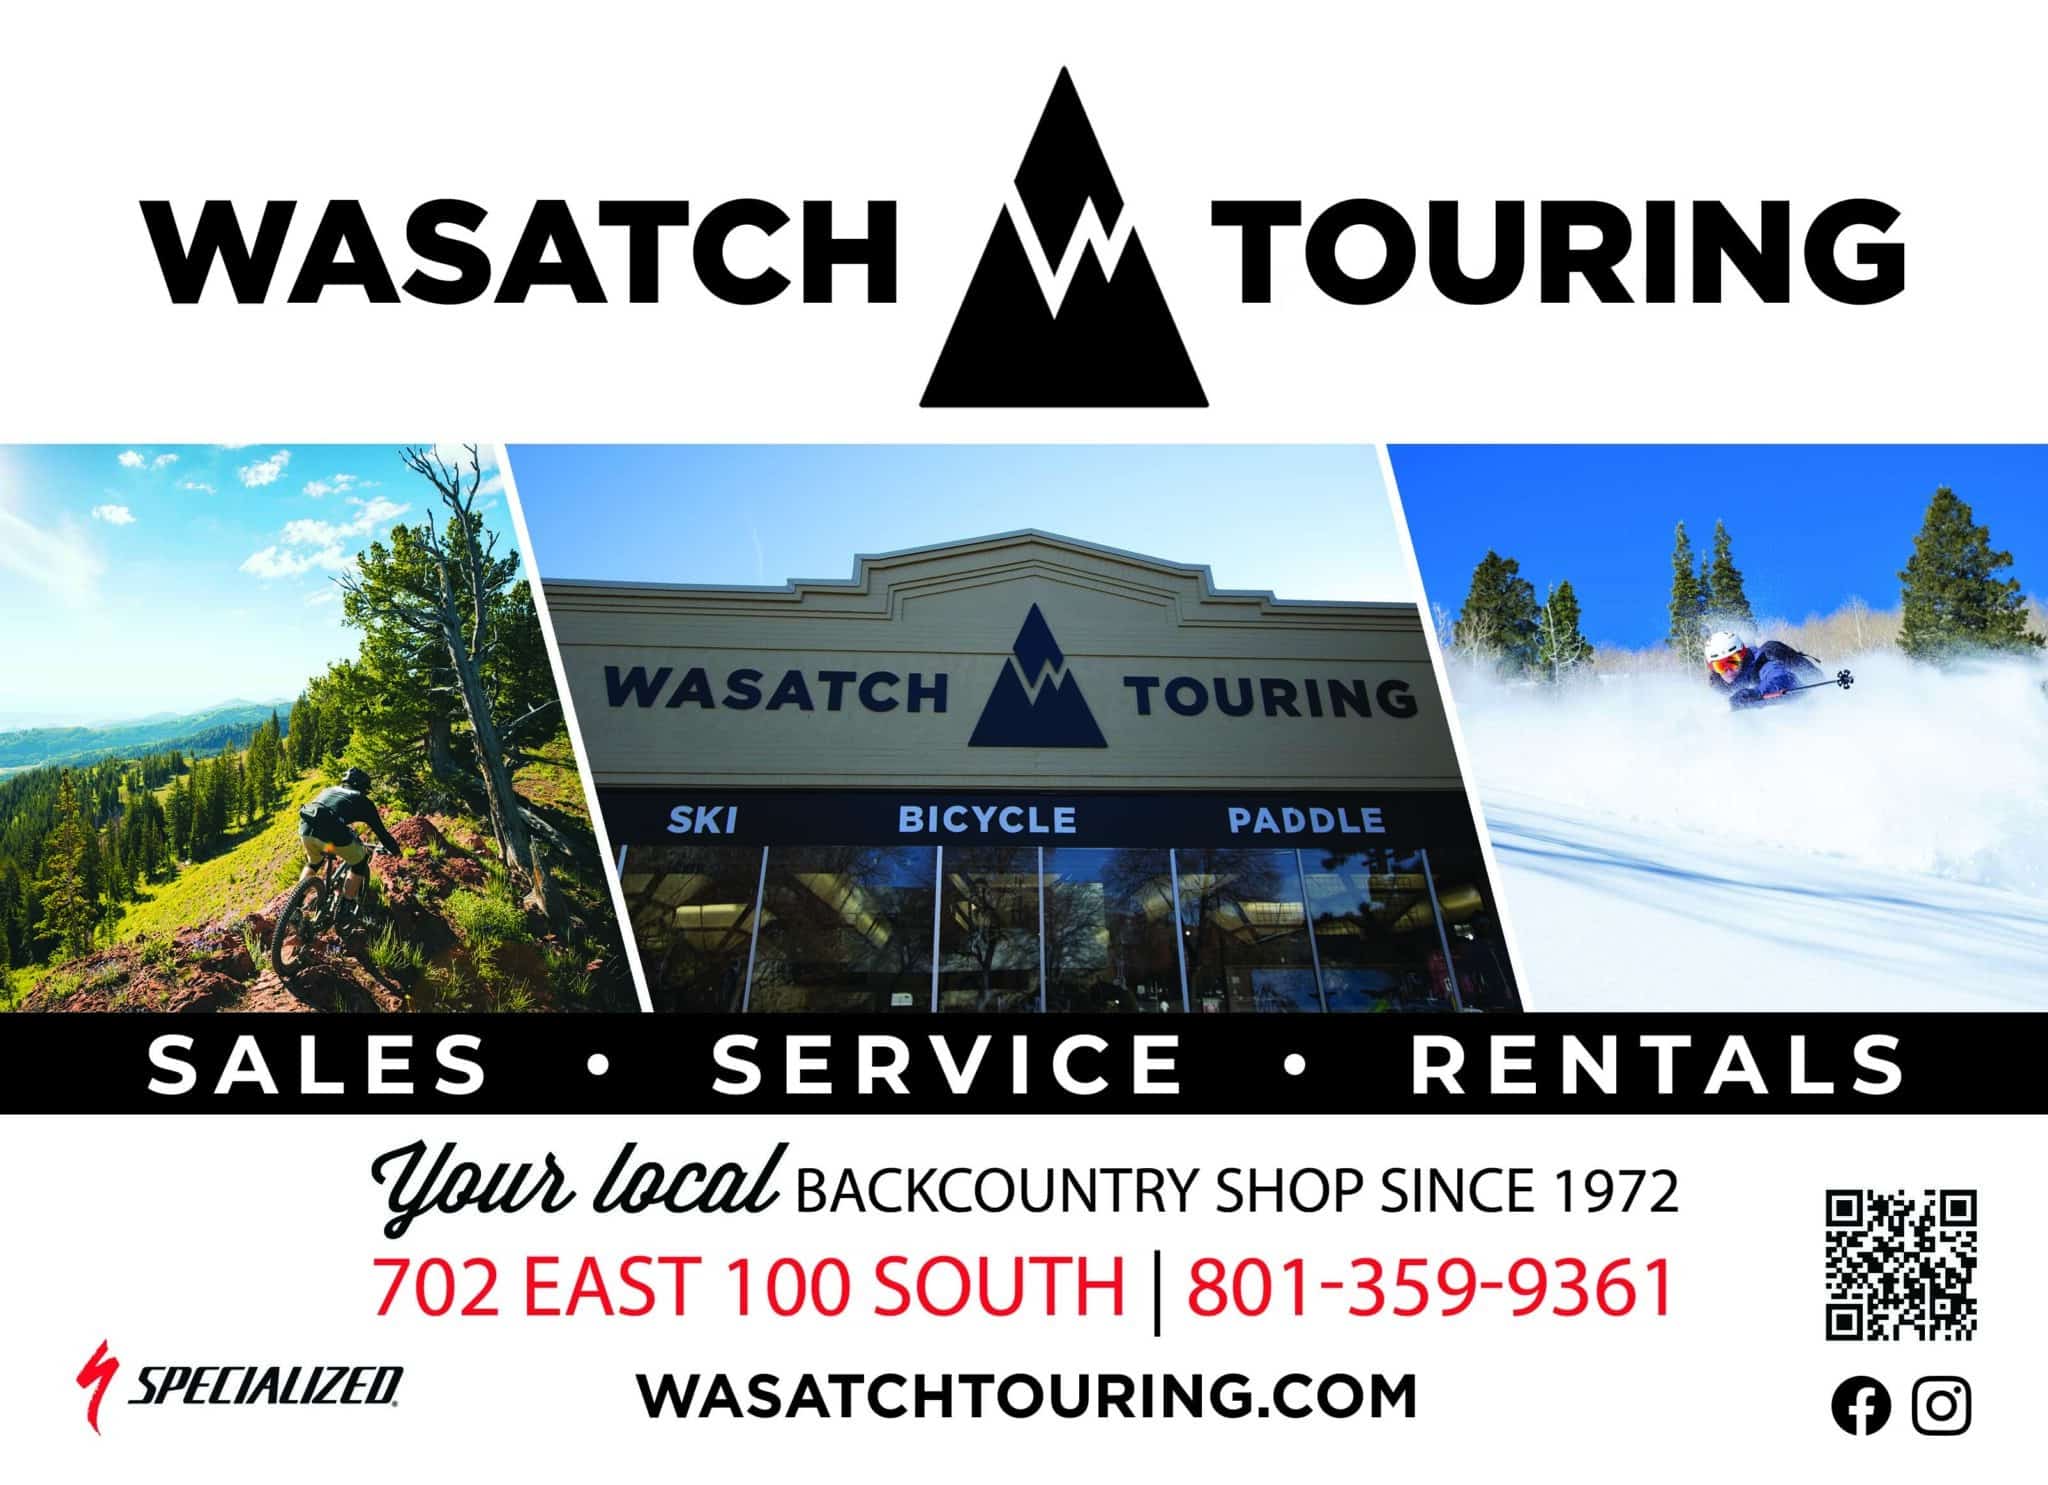 Wasatch Mountain Touring Co